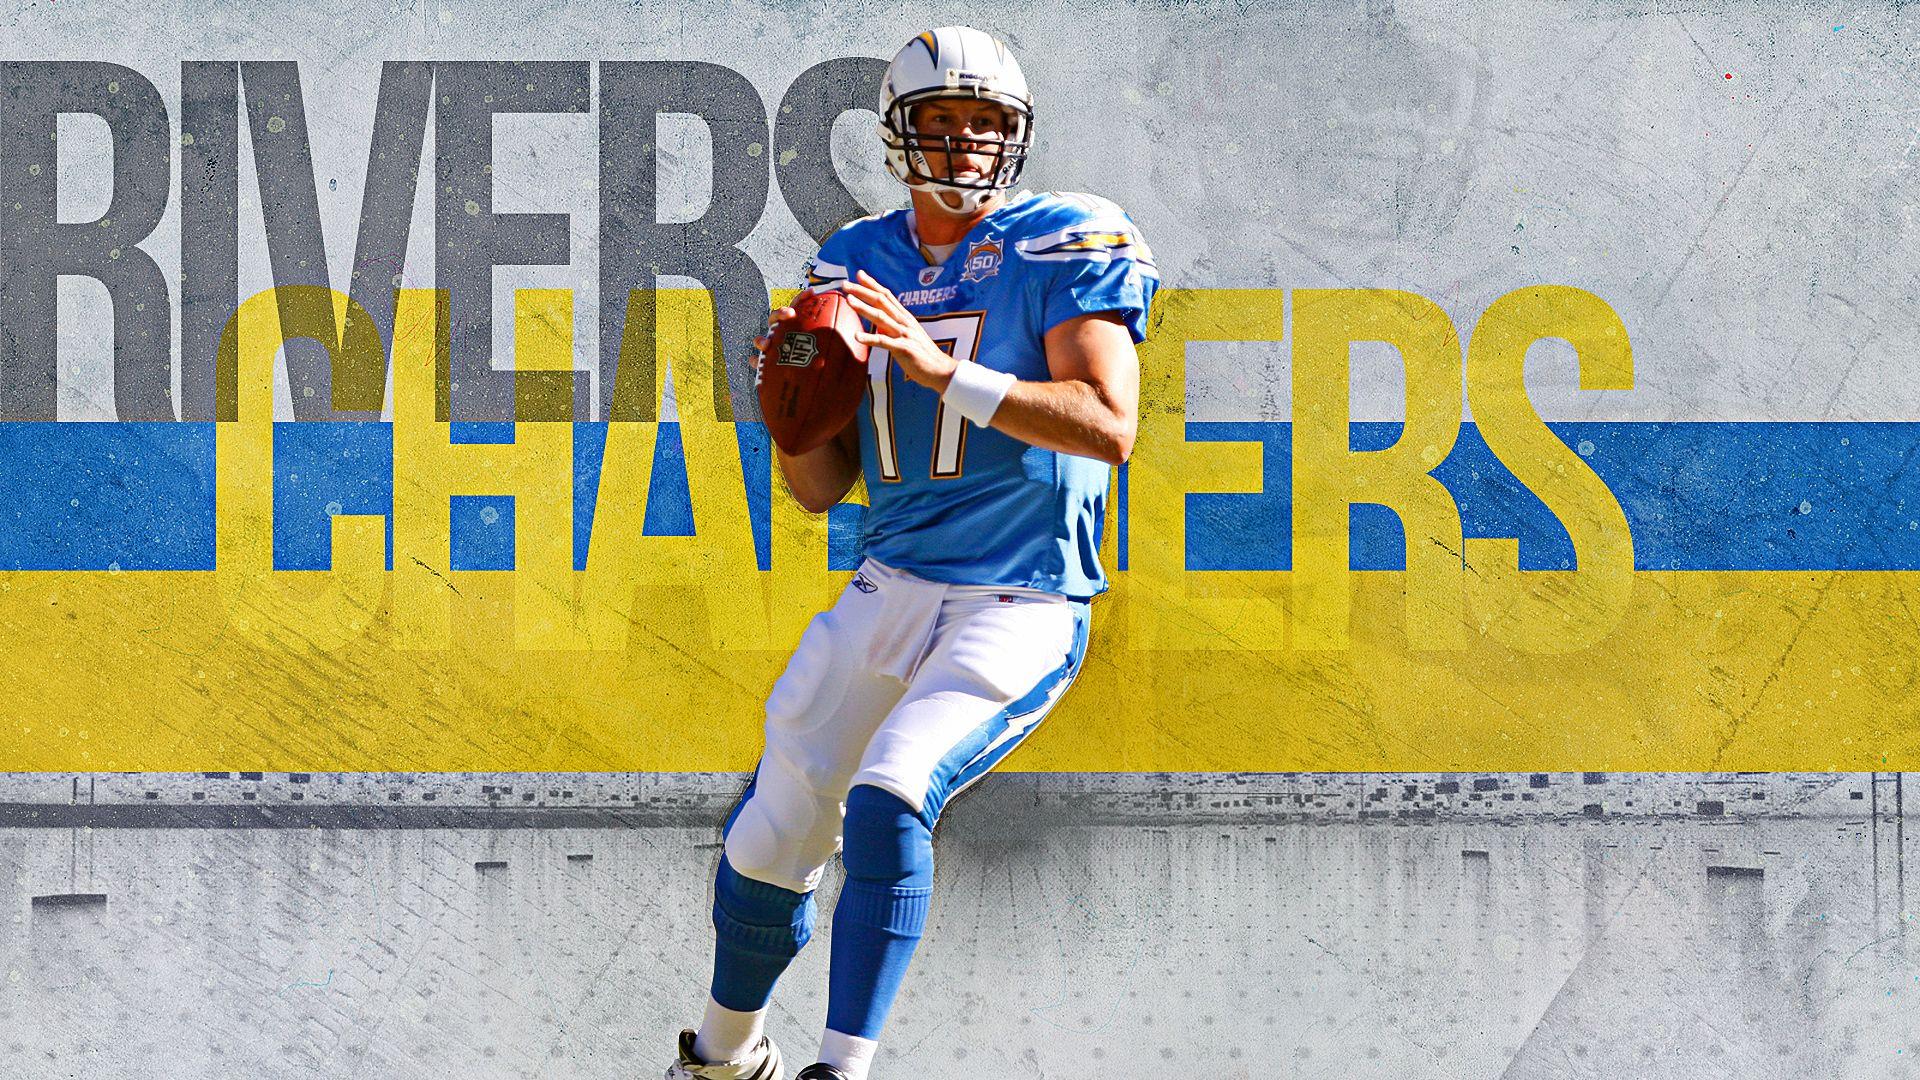 Philip Rivers Wallpapers